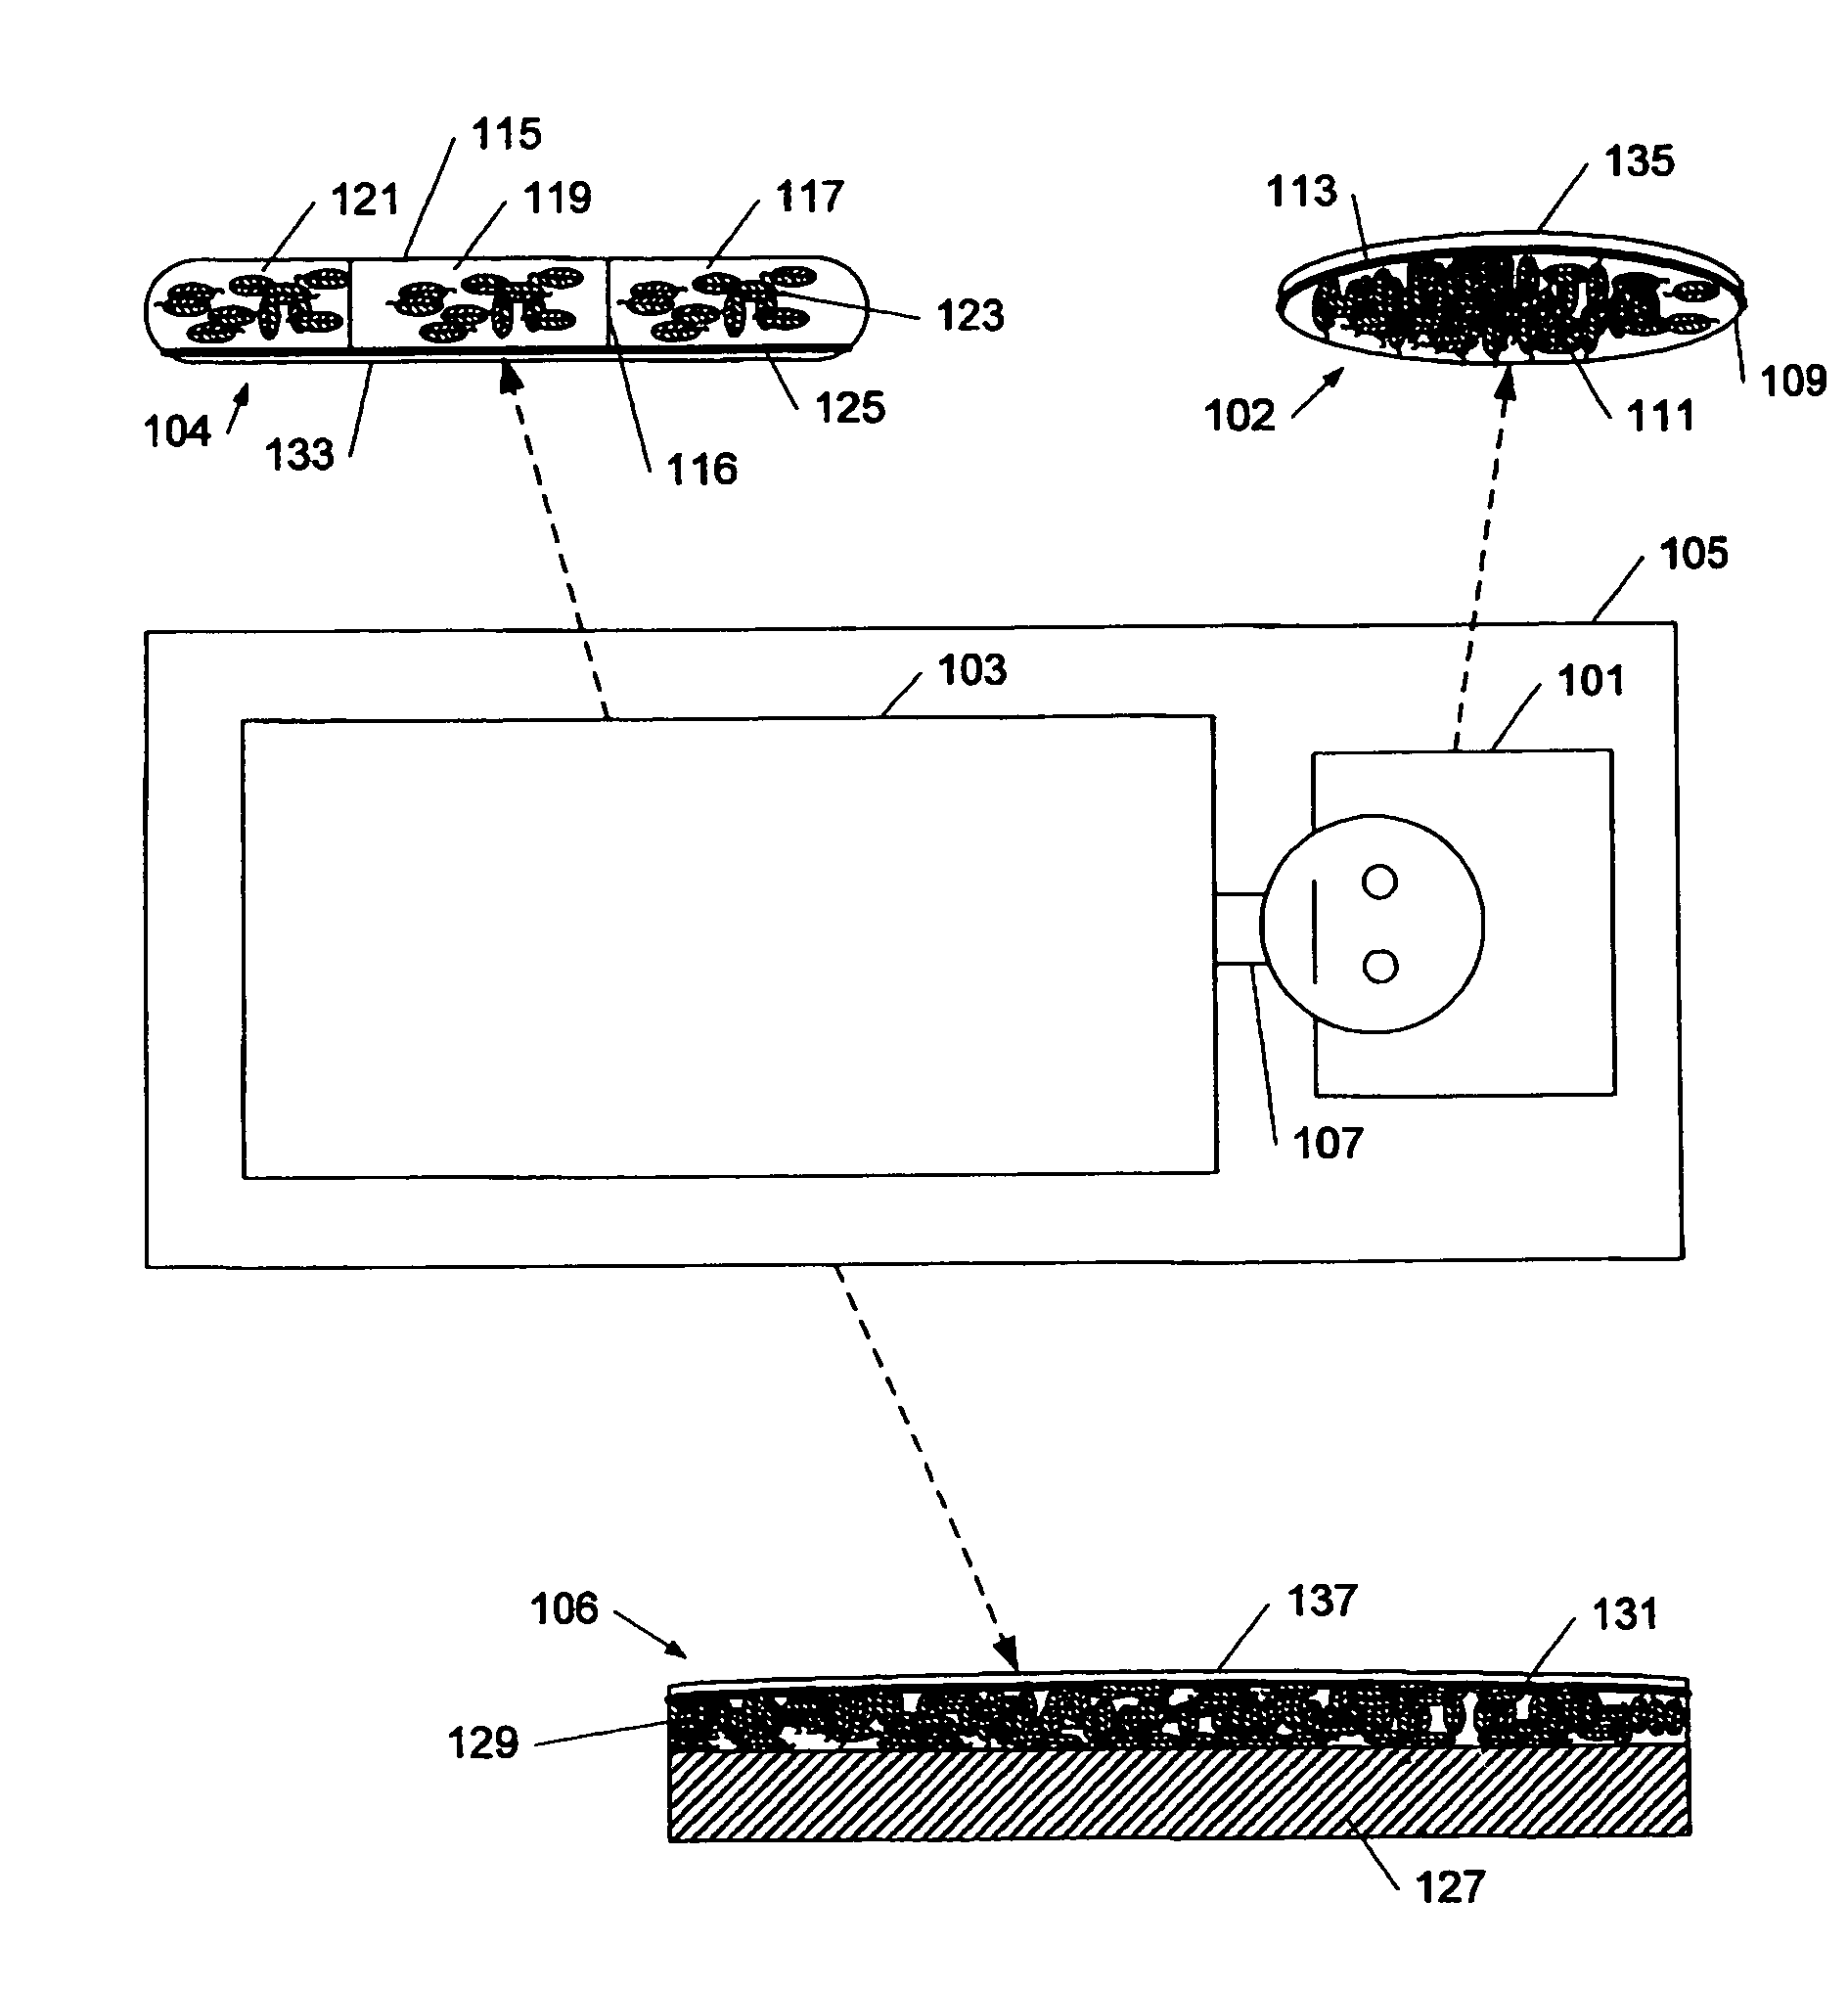 Sleeping devices comprising a combination of down filling and a temperature regulating material